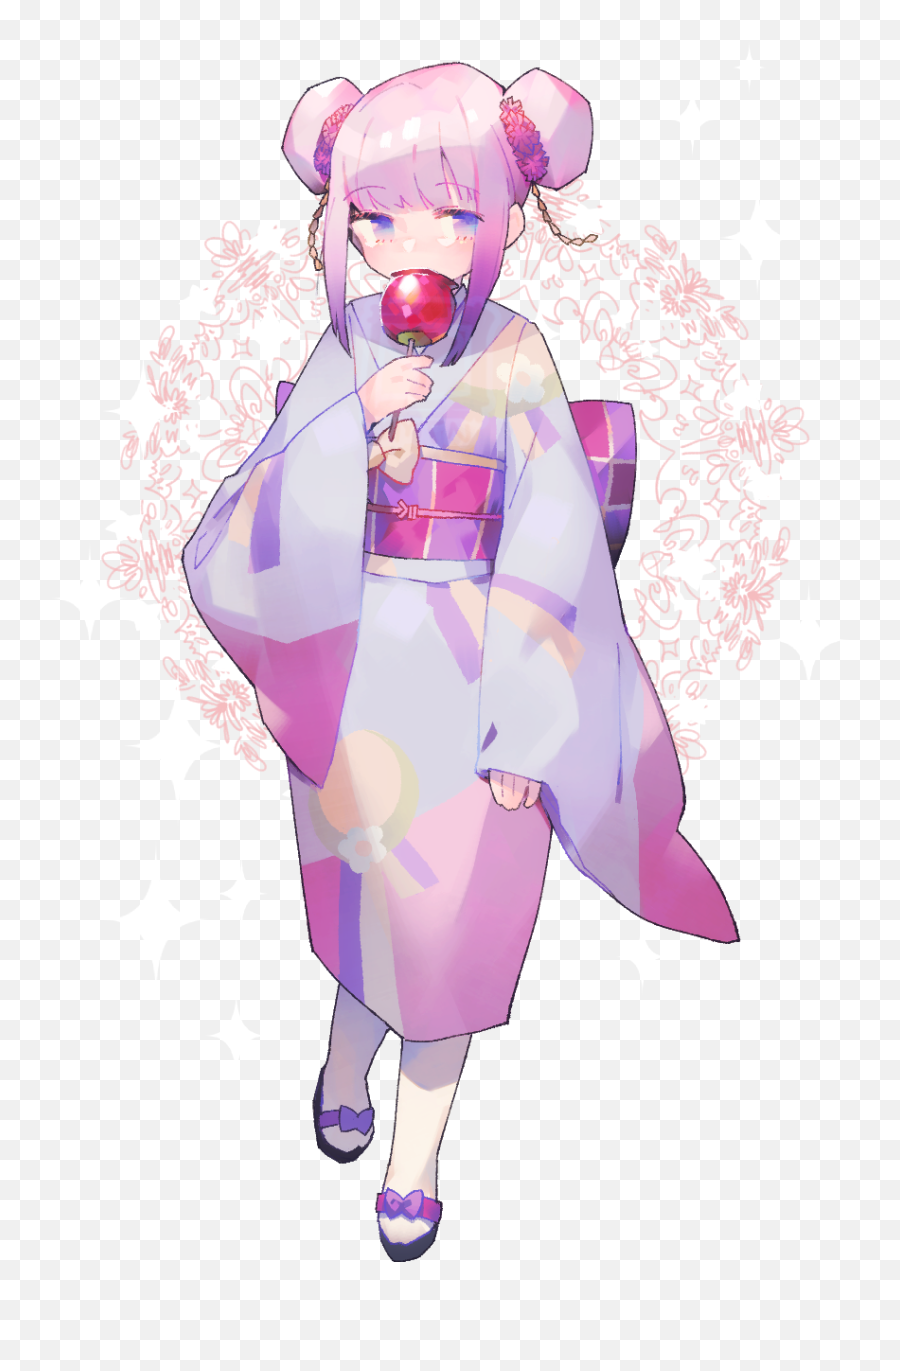 Kanna With A Candy Apple - Imgur Illustration Png,Kanna Png